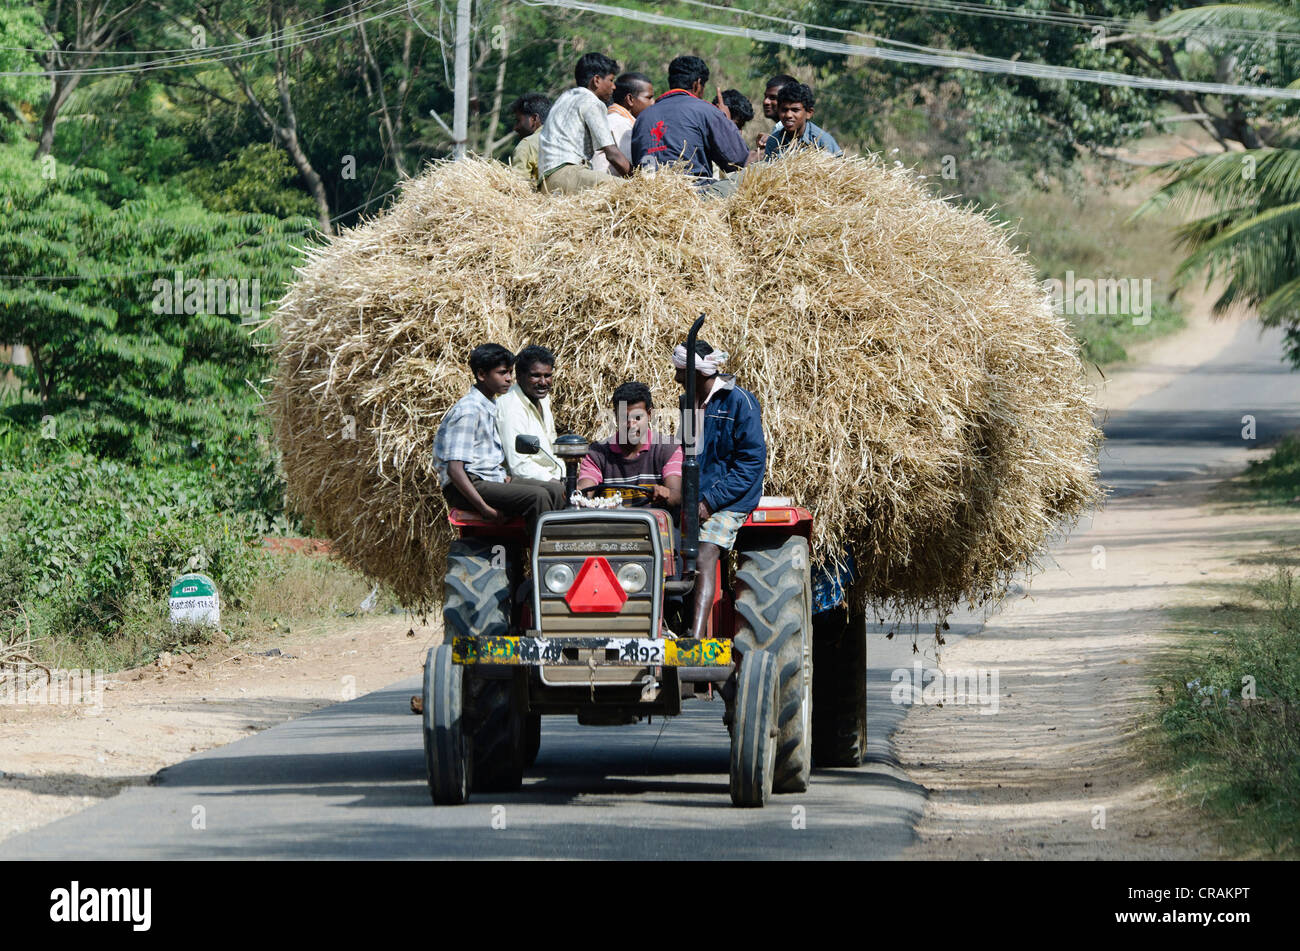 Indians travelling on a tractor loaded with hay, Mysore district, Karnataka, South India, India, Asia Stock Photo